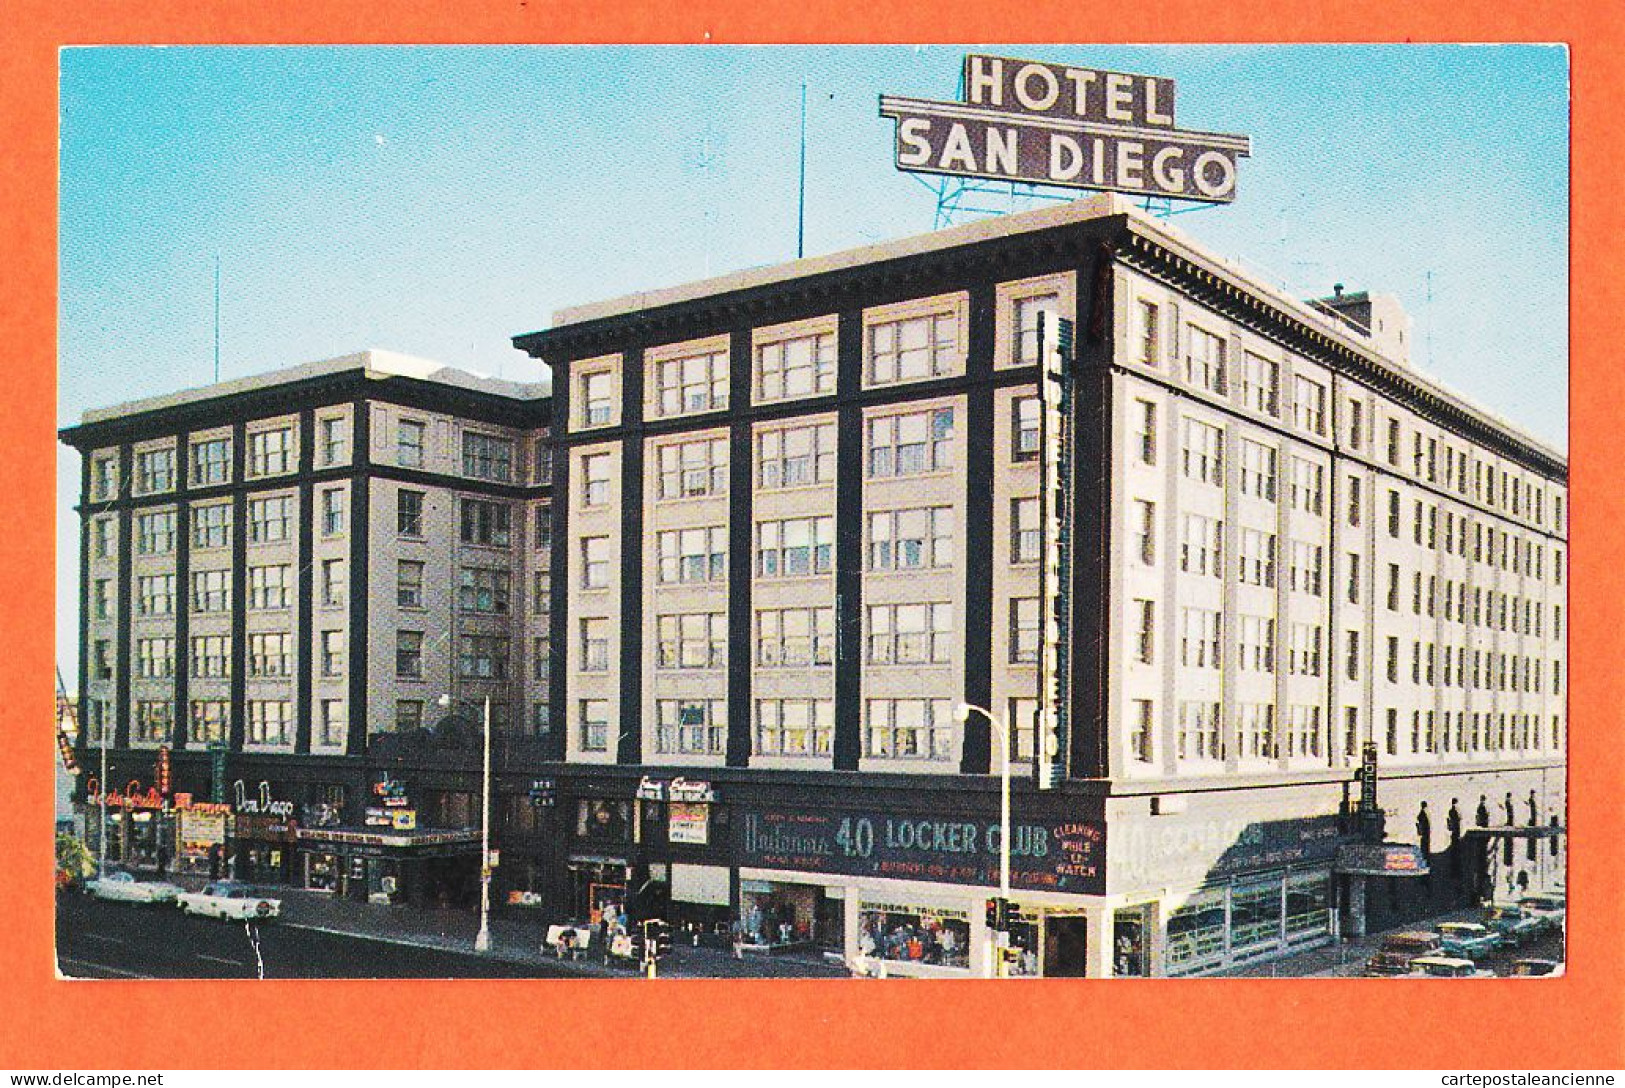 24025 / THE HOTEL SAN DIEGO California  Largest Finest Hotels On Broadway 1960s  - San Diego